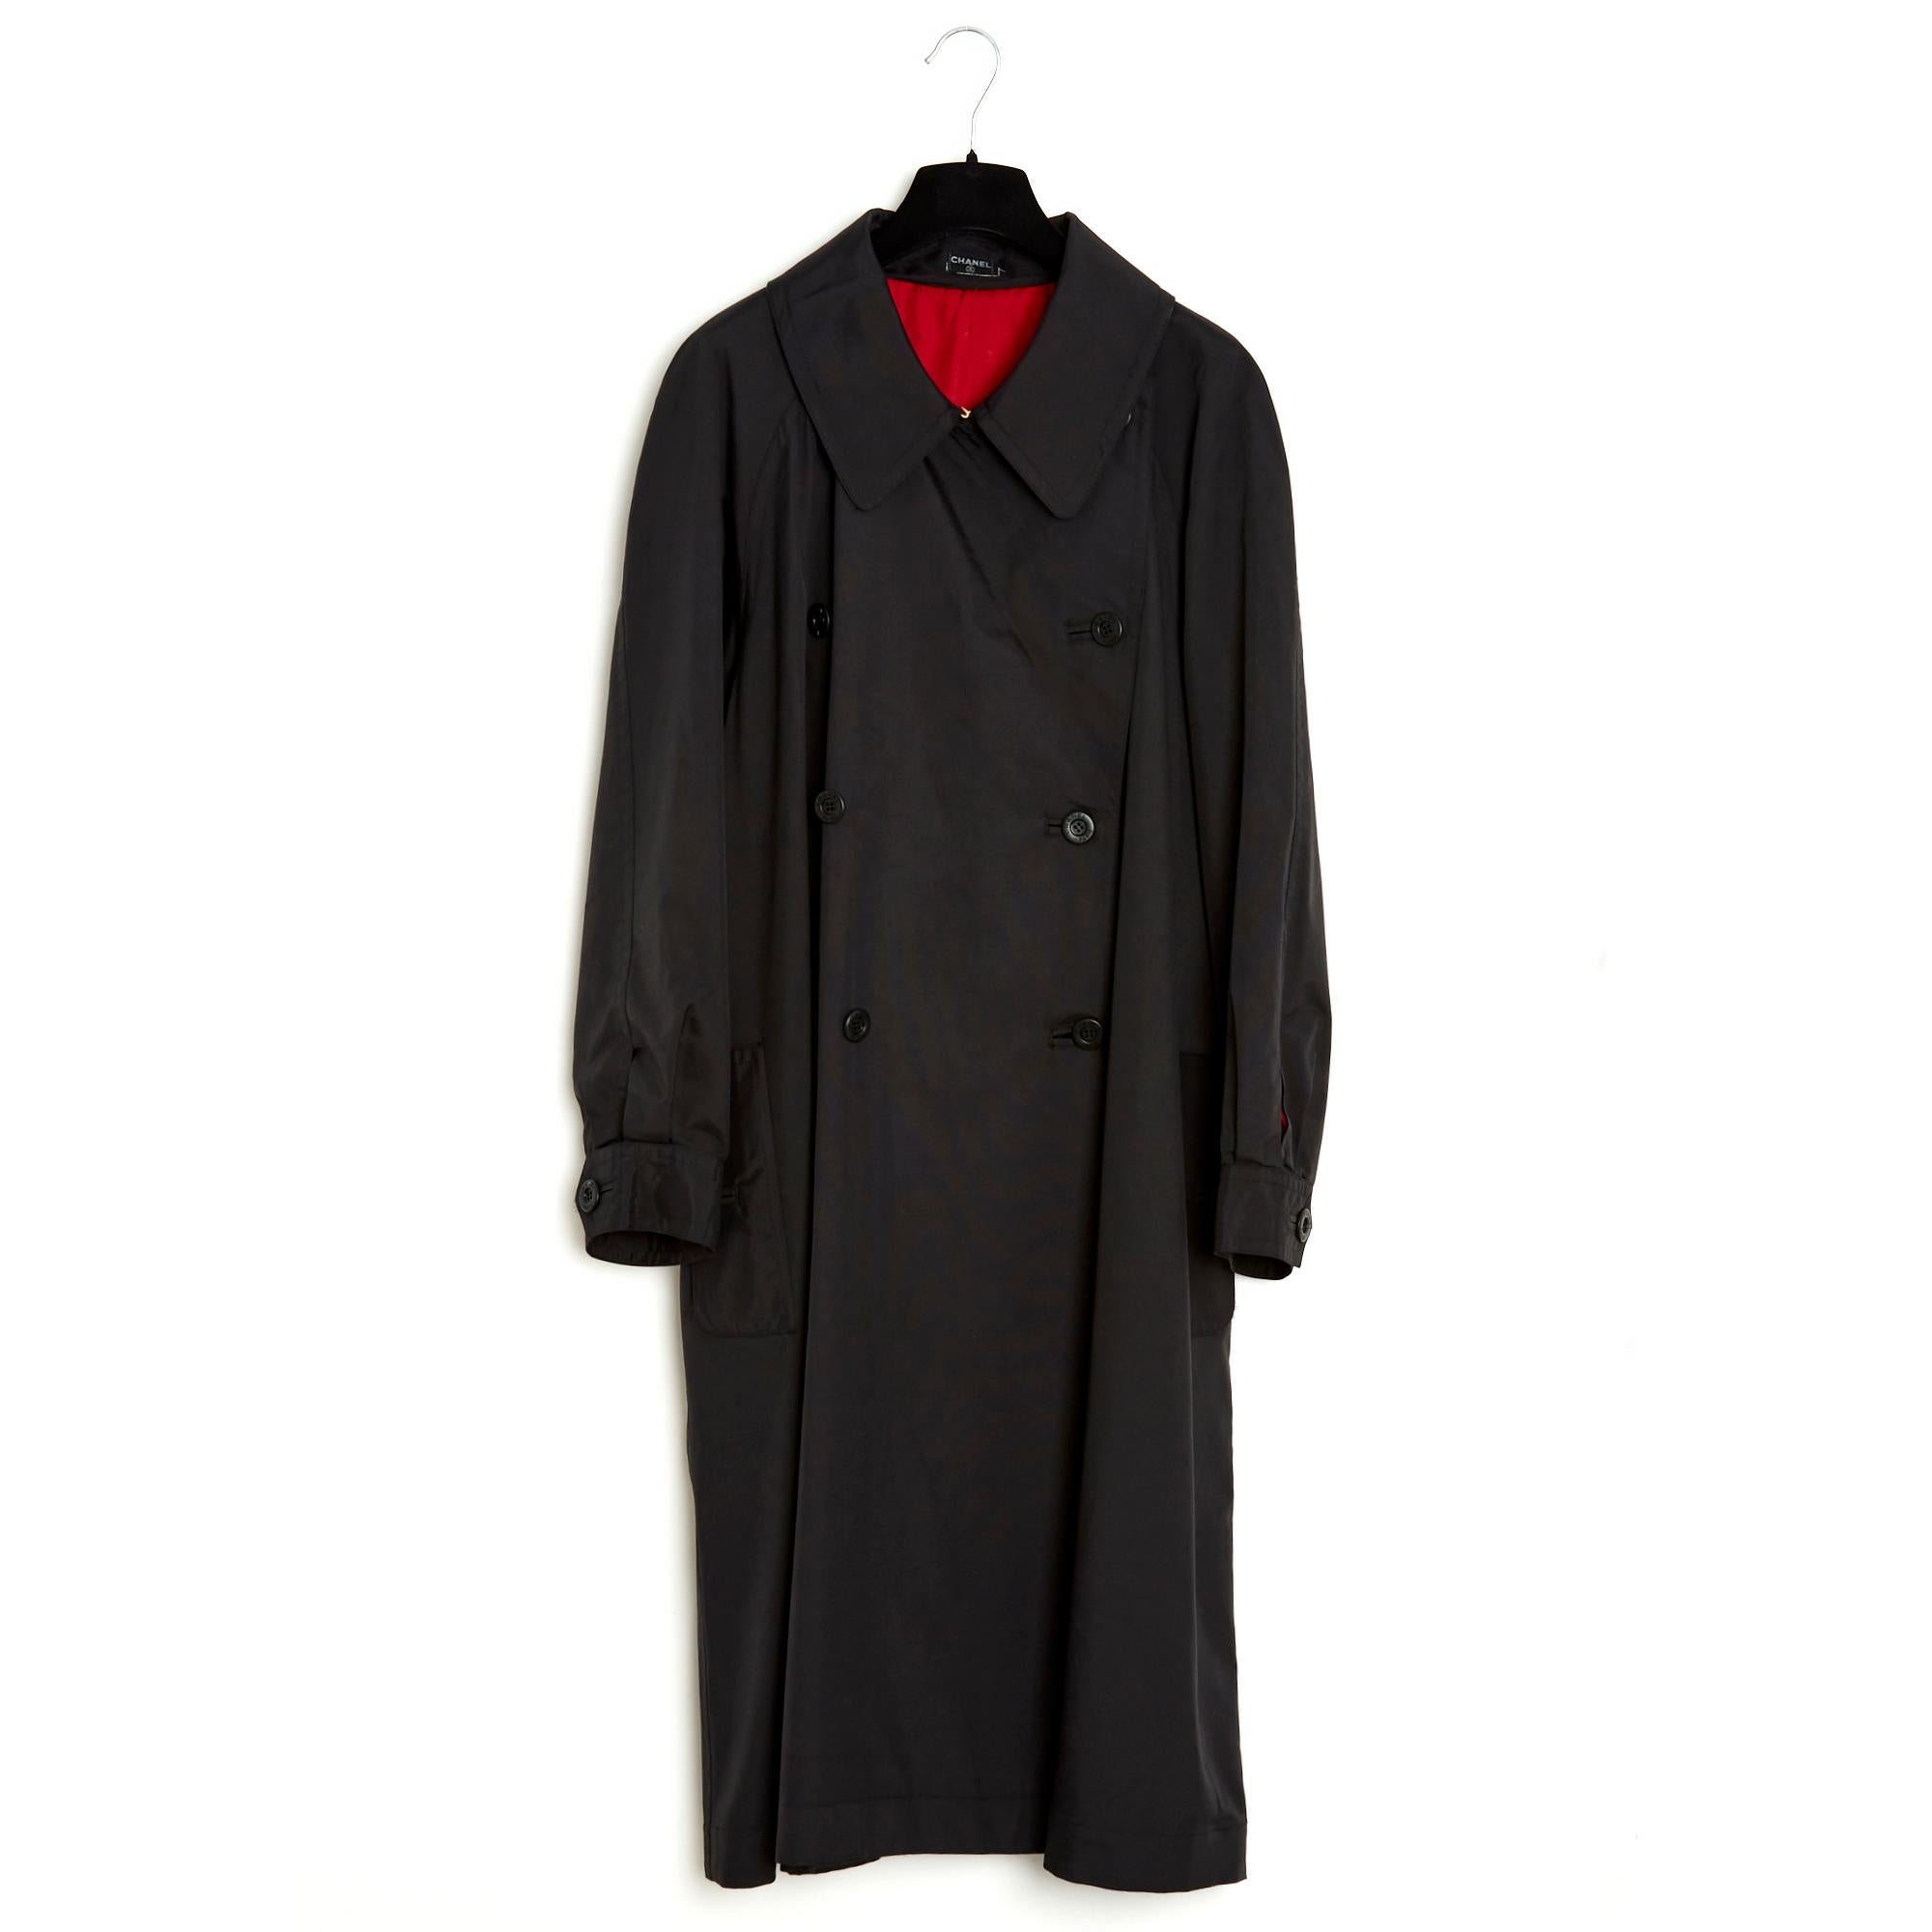 Chanel trench coat in black silk rep, wide collar closed with a gold hook, double breasted Chanel logo on the front, 2 slit pockets closed with a button, long raglan sleeves closed with 2 buttons, large full-length box pleat at the back , bright red